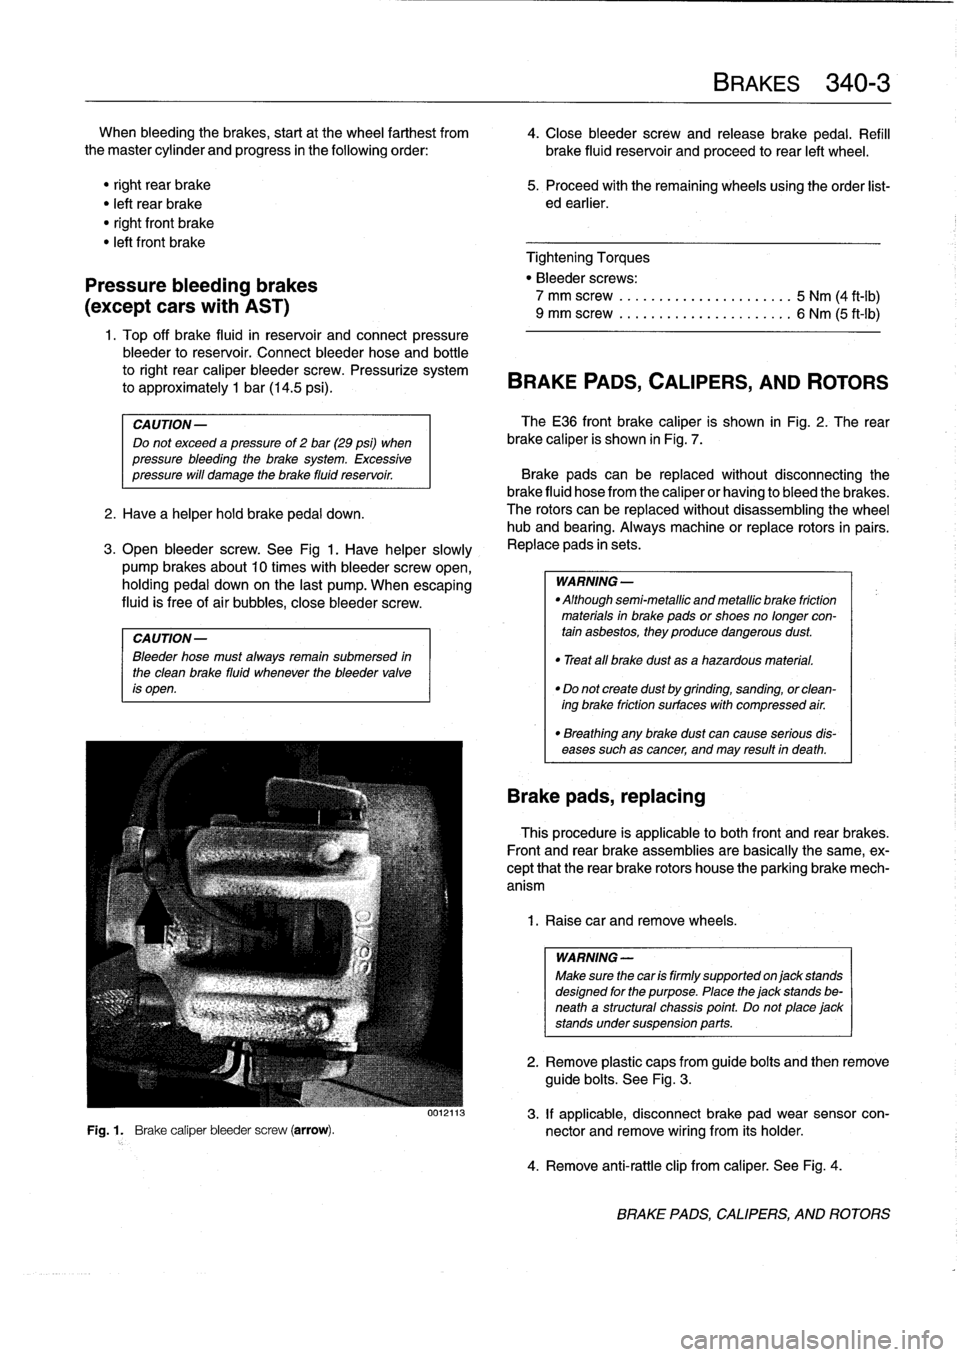 BMW 318i 1998 E36 Workshop Manual 
When
bleeding
the
brakes,
startat
the
wheel
farthest
from

	

4
.
Close
bleeder
screw
and
release
brake
pedal
.
Refill
the
master
cylinder
and
progress
in
the
following
order
:

	

brake
fluid
reserv